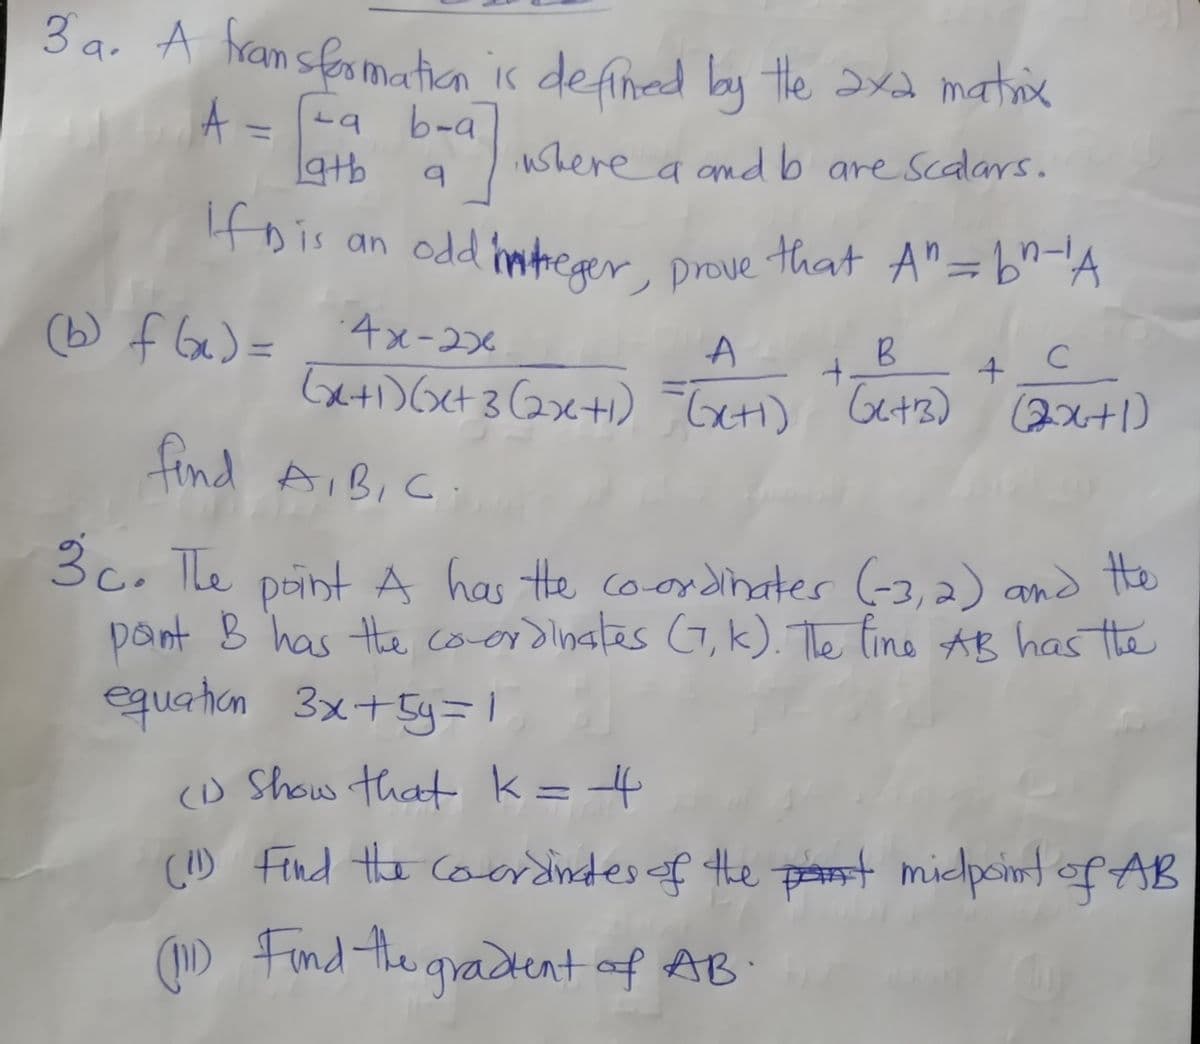 3 a. A hransfosmatian is defined by the axd matiox
A= -a b-a
19tb
ushere a ondb are scalars.
Hois an odd hmtreaer prove that A"=b^A
(b) f Ge)=
4x-236
C
t.
Gxti) Get 3 Gxti) Tuti) Gets) 2x+1)
find AIBIC
paint A has te co-ordinates (-3,2) and the
pant B has the cooidinates (G,k). The line AB has te
equation 3x+5y=|
3c. The
(D Show that k= 4
() Find the coardindes of the pt midpoint of AB
(1D Find the gradent of AB
